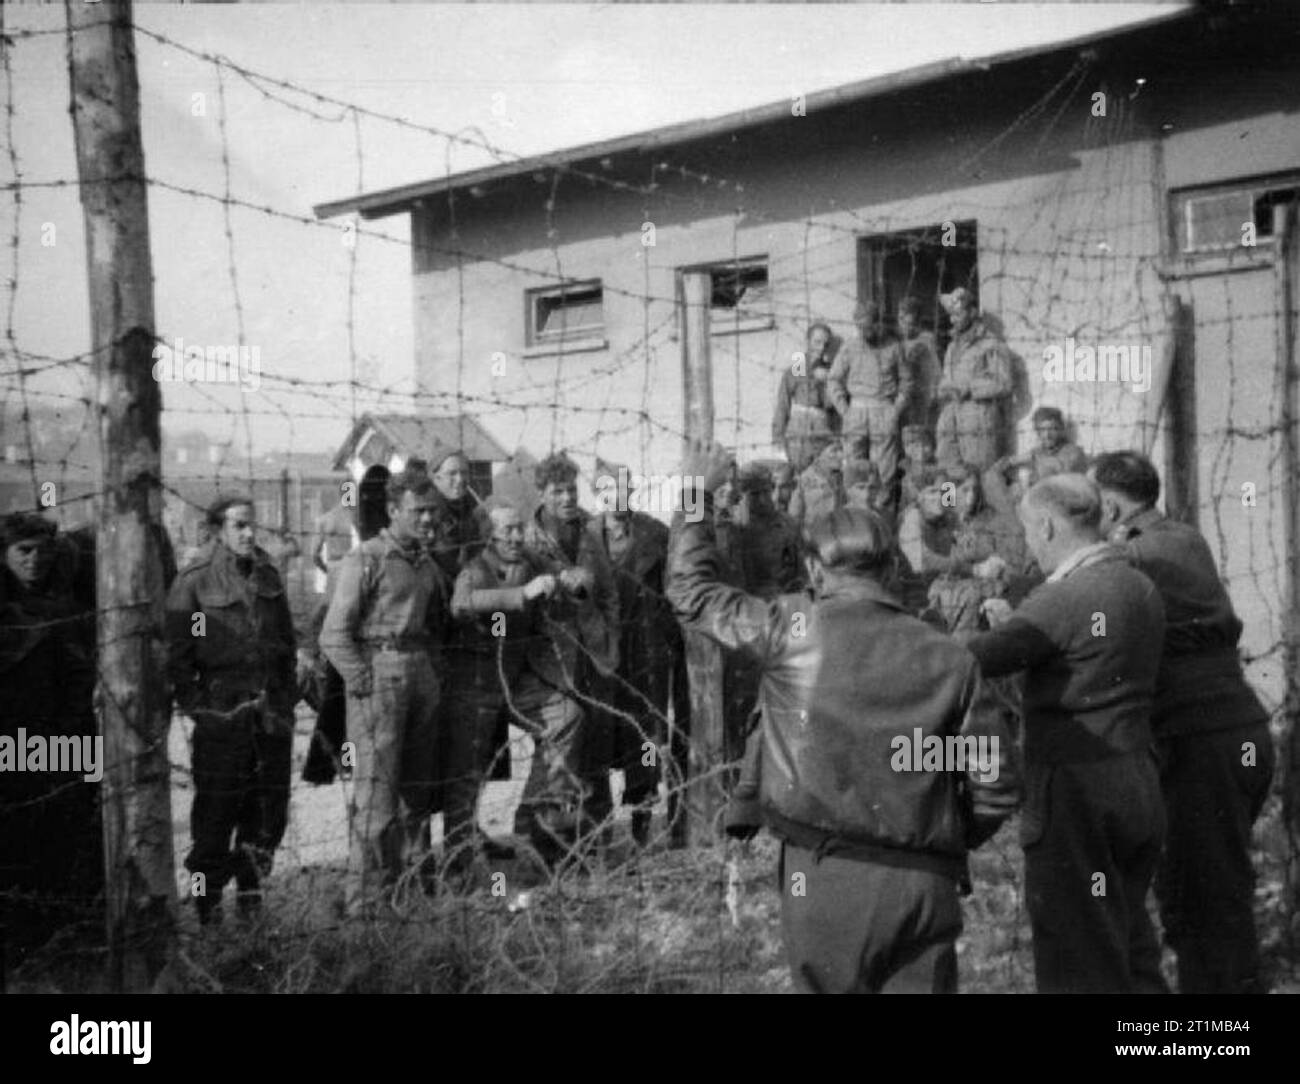 The British Army in North-west Europe 1944-45 A photograph taken covertly at Stalag VIIA at Mooseburg, showing British POWs talking to new inmates captured on the Greek island of Leros. Date unknown. Stock Photo